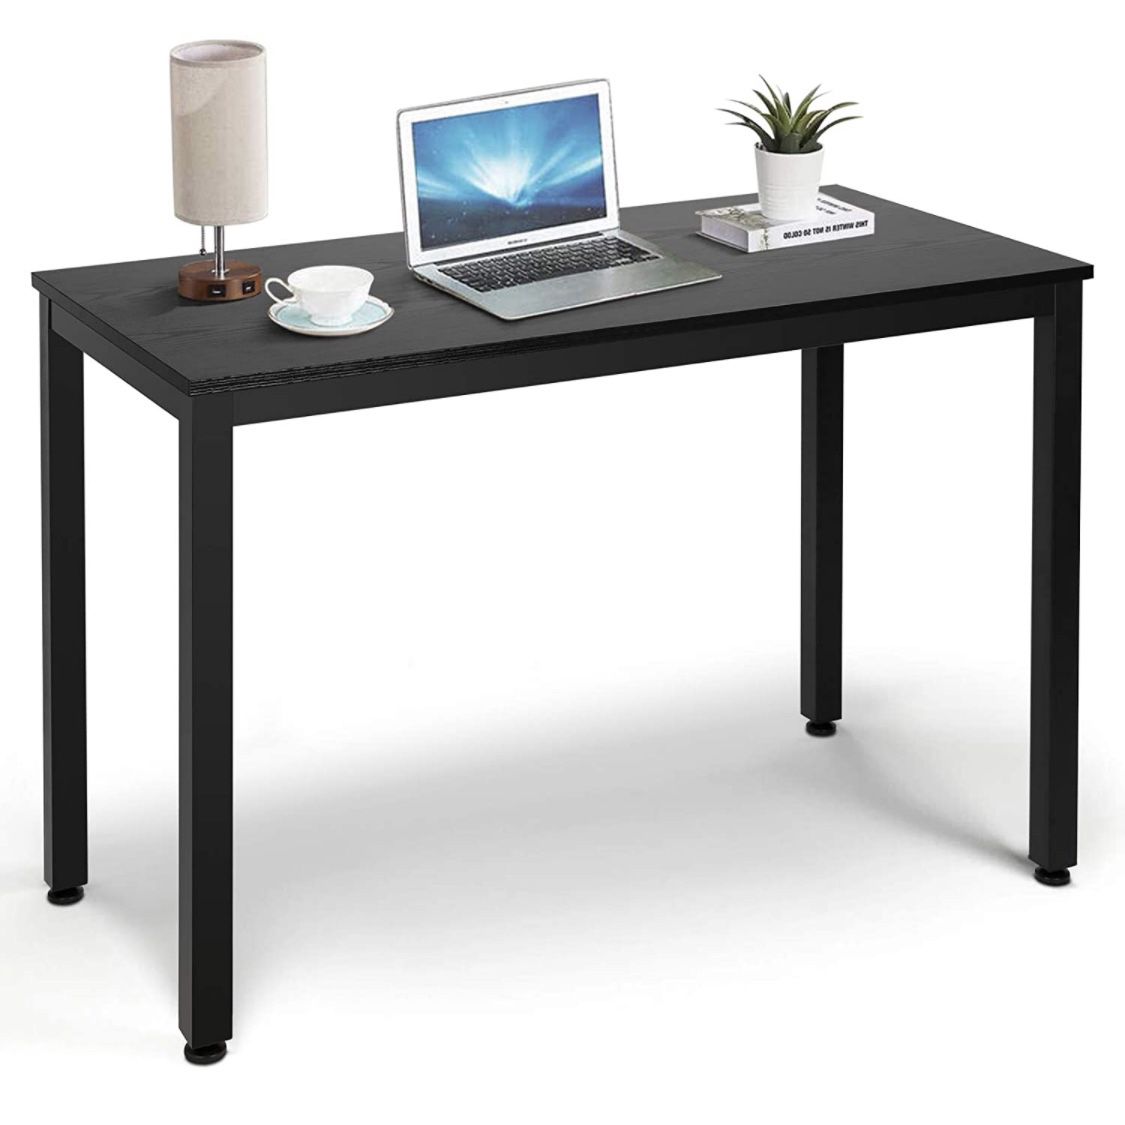 Computer Desk Study Writing Table for Home Office Workstation,39.4"x19.7"x29